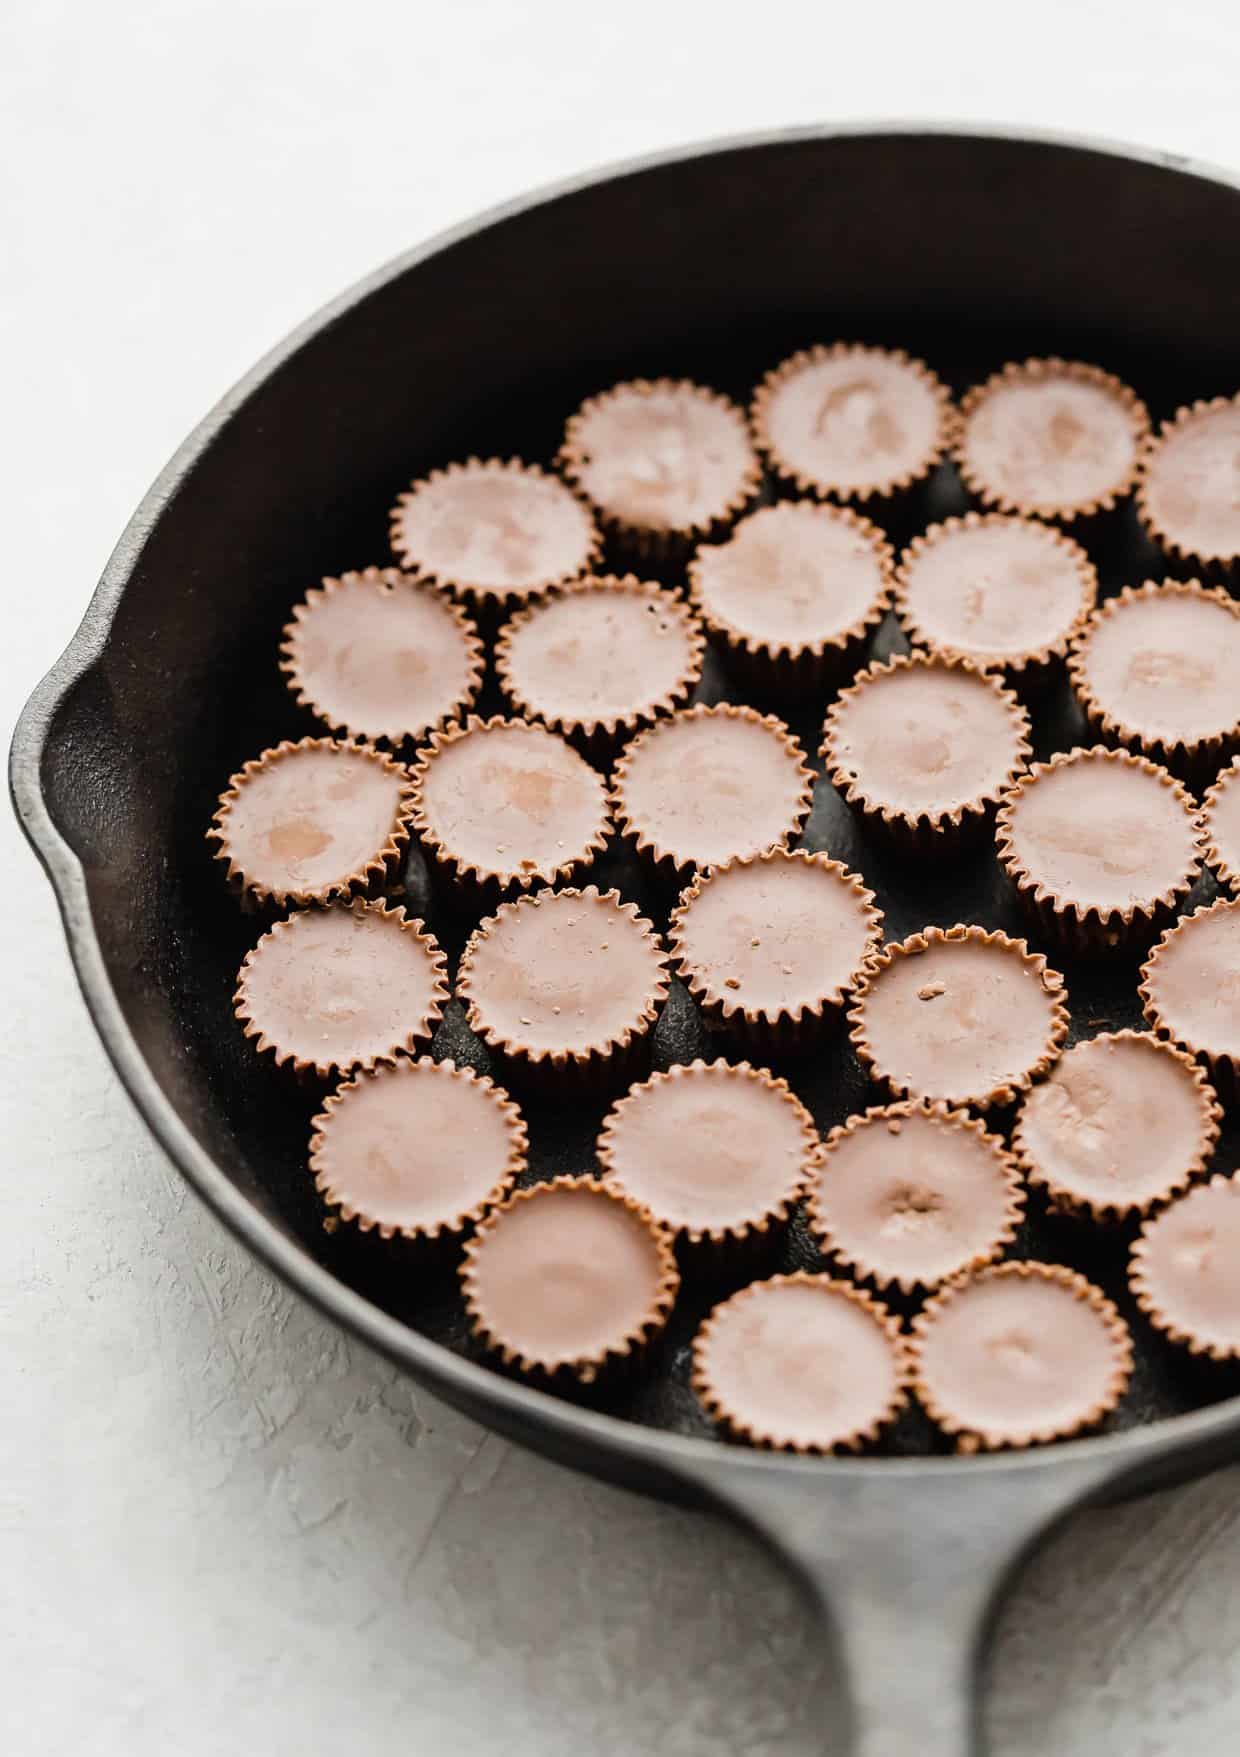 Reese's peanut butter cups in the bottom of a black skillet.